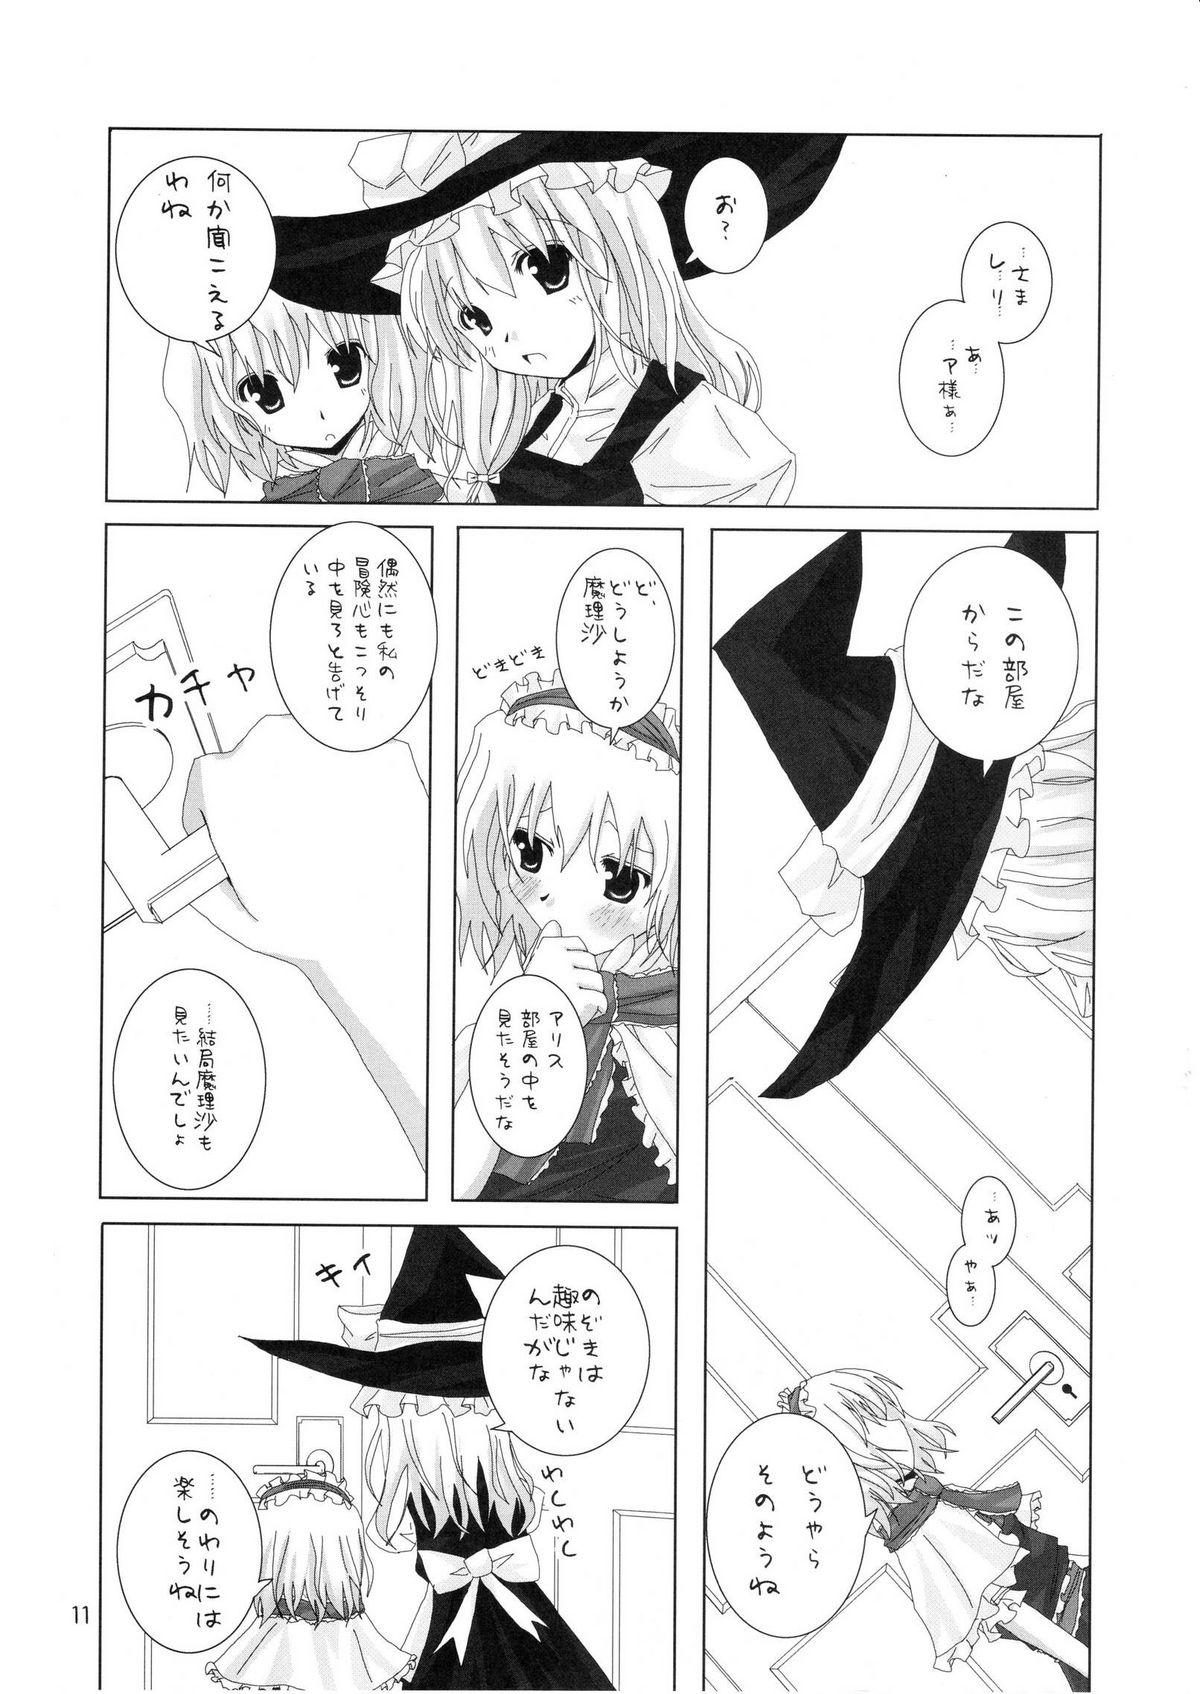 Class Room Gensou Kitan II - Touhou project Exhibitionist - Page 12